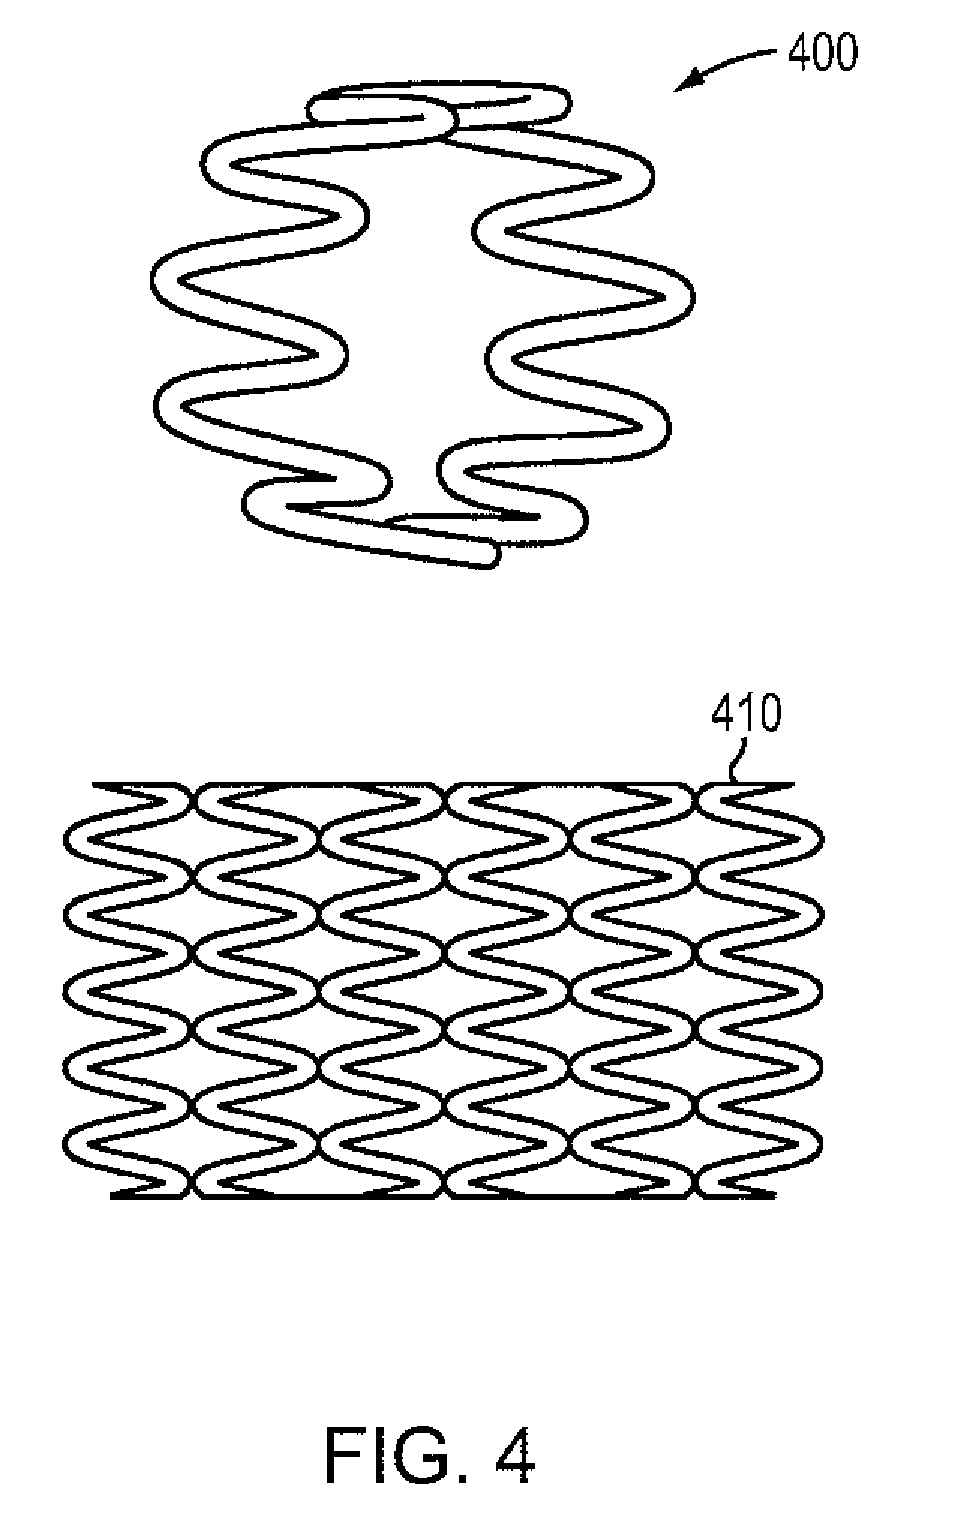 Magnesium-based absorbable implants